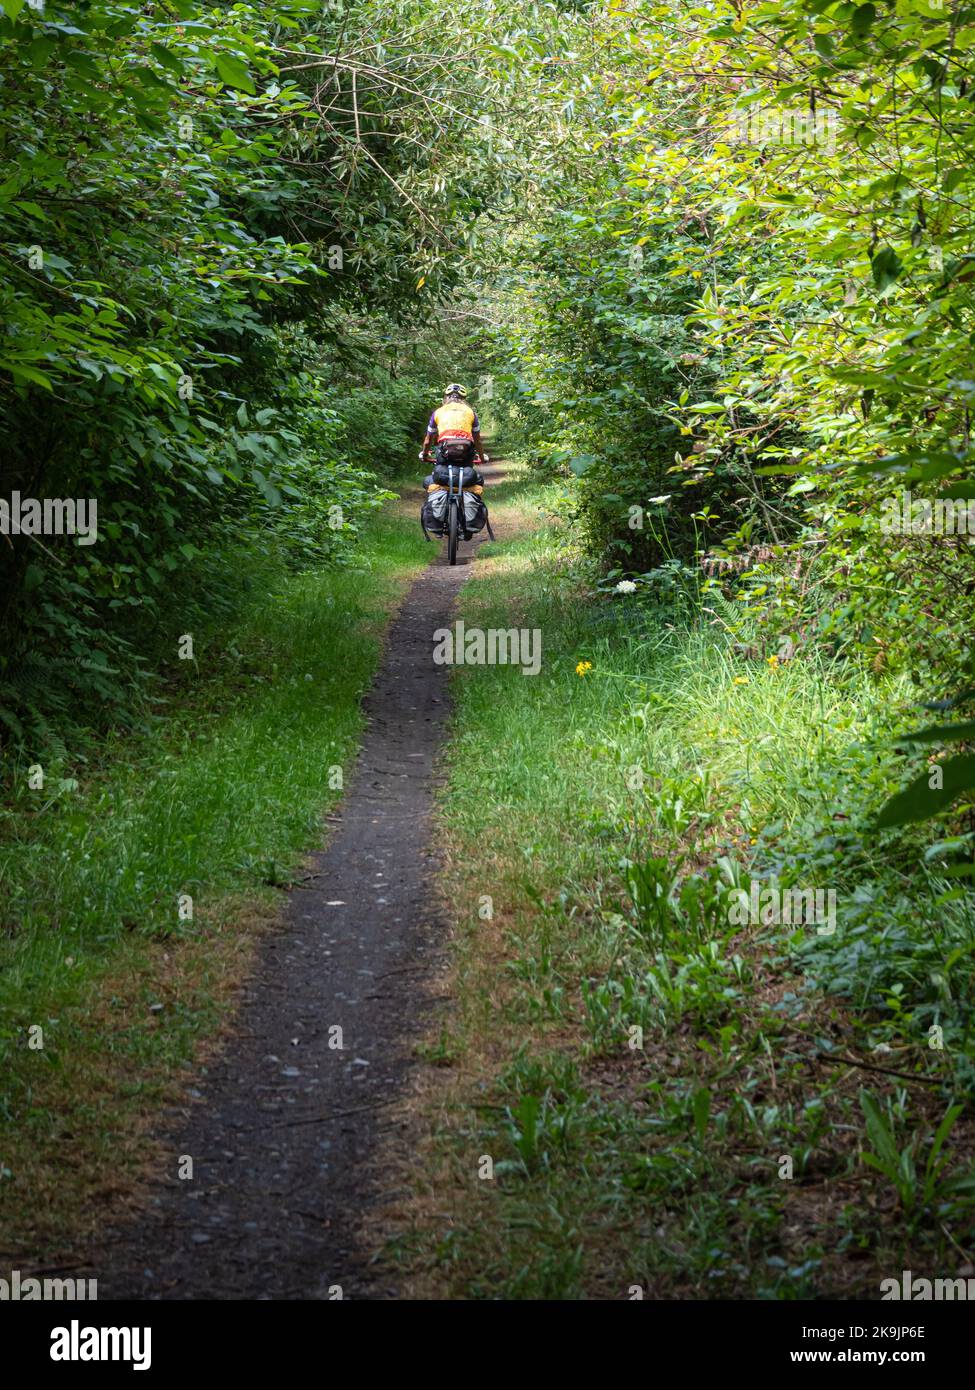 WA22627-00...WASHINGTON - Riding on one of two unpaved sections of the Olympic Discovery Trail. Stock Photo